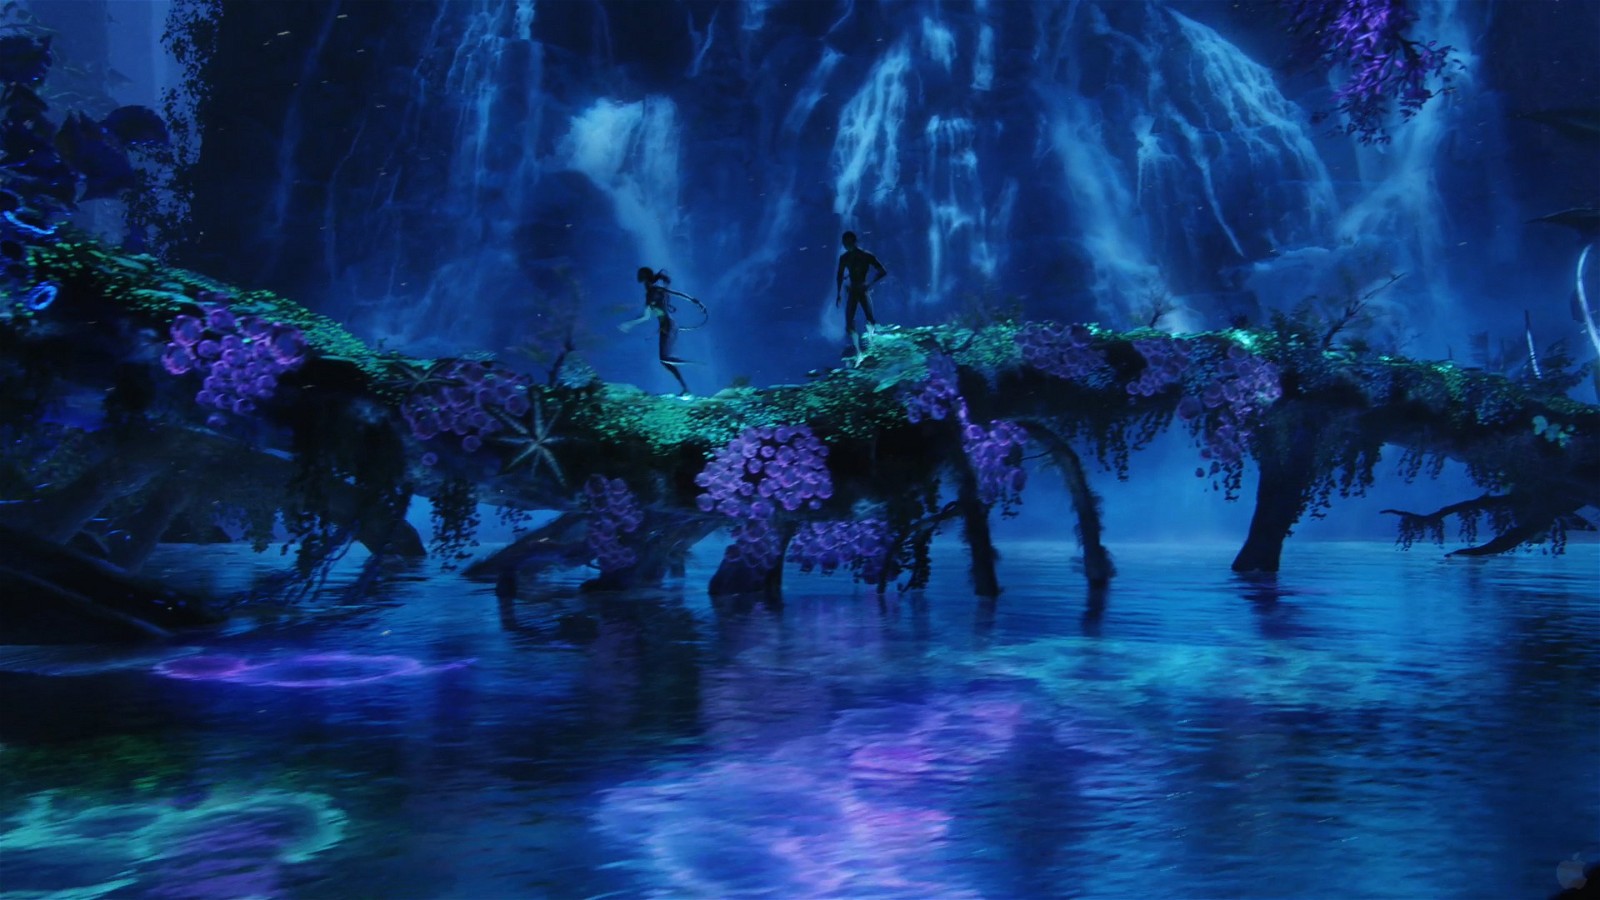 The VFX of Avatar (2009) by James Cameron was praised by many.